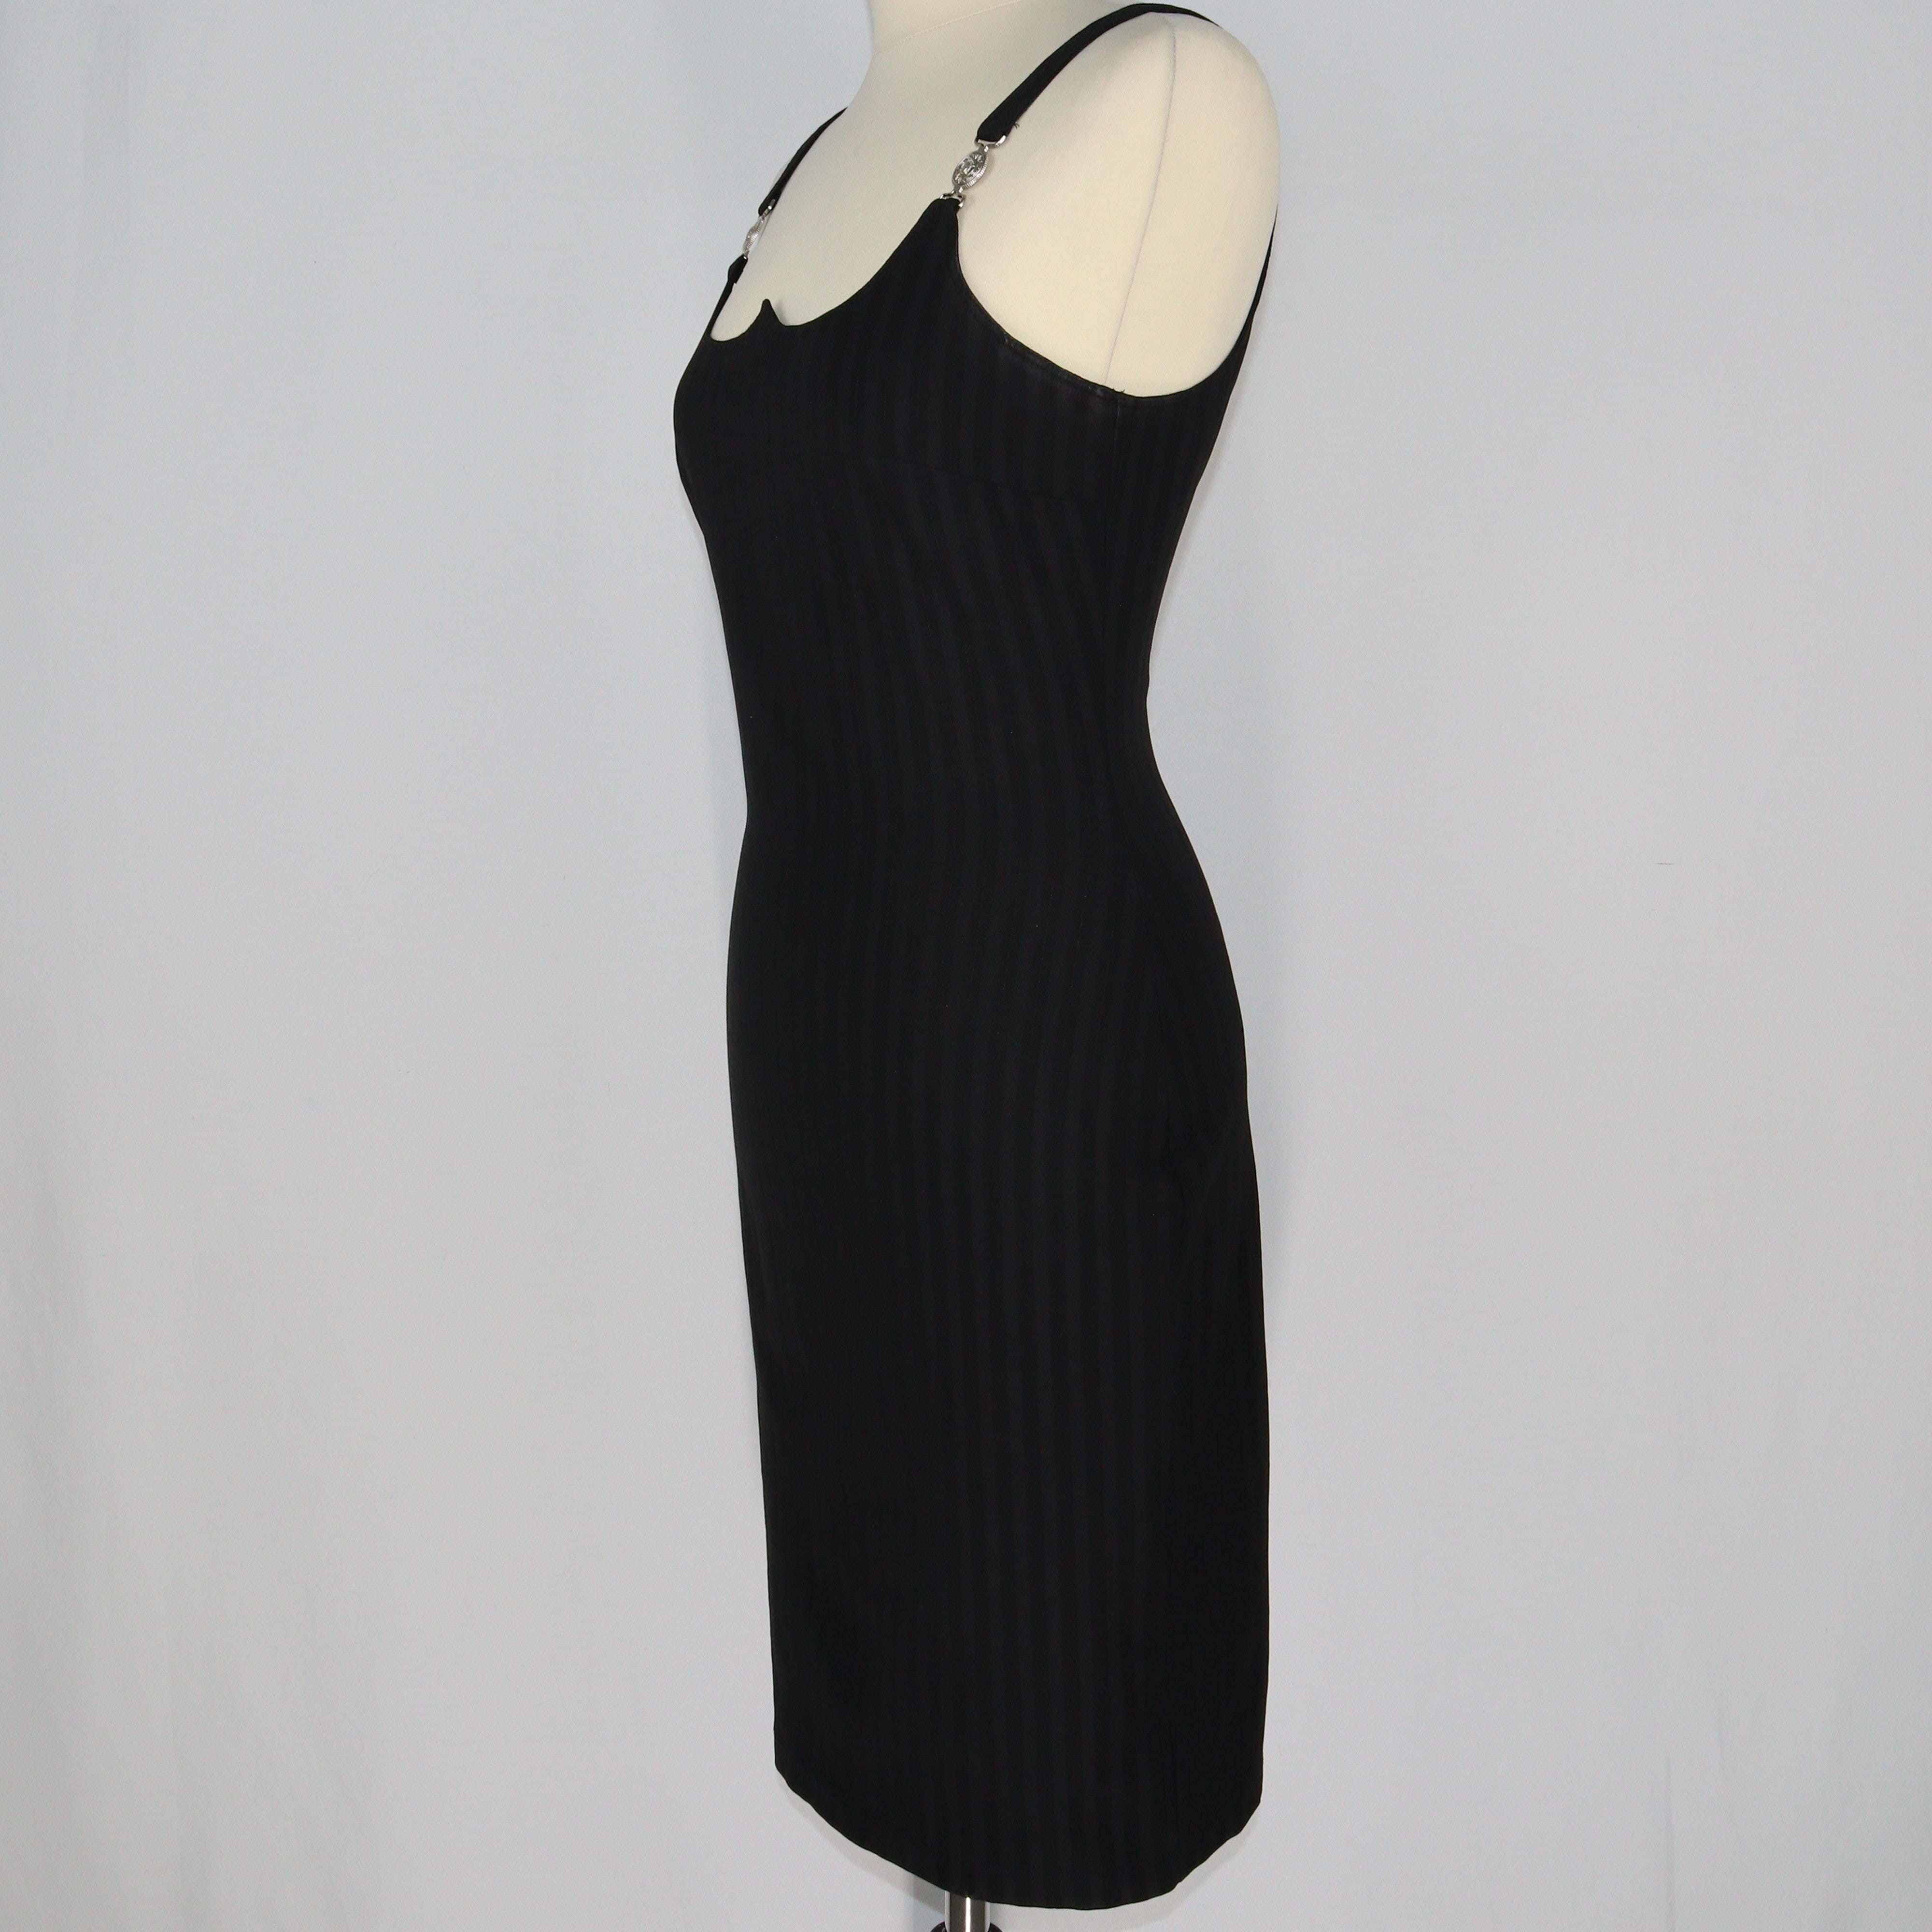 Black Bodycon Midi Dress Clothings Versace Jeand Couture 